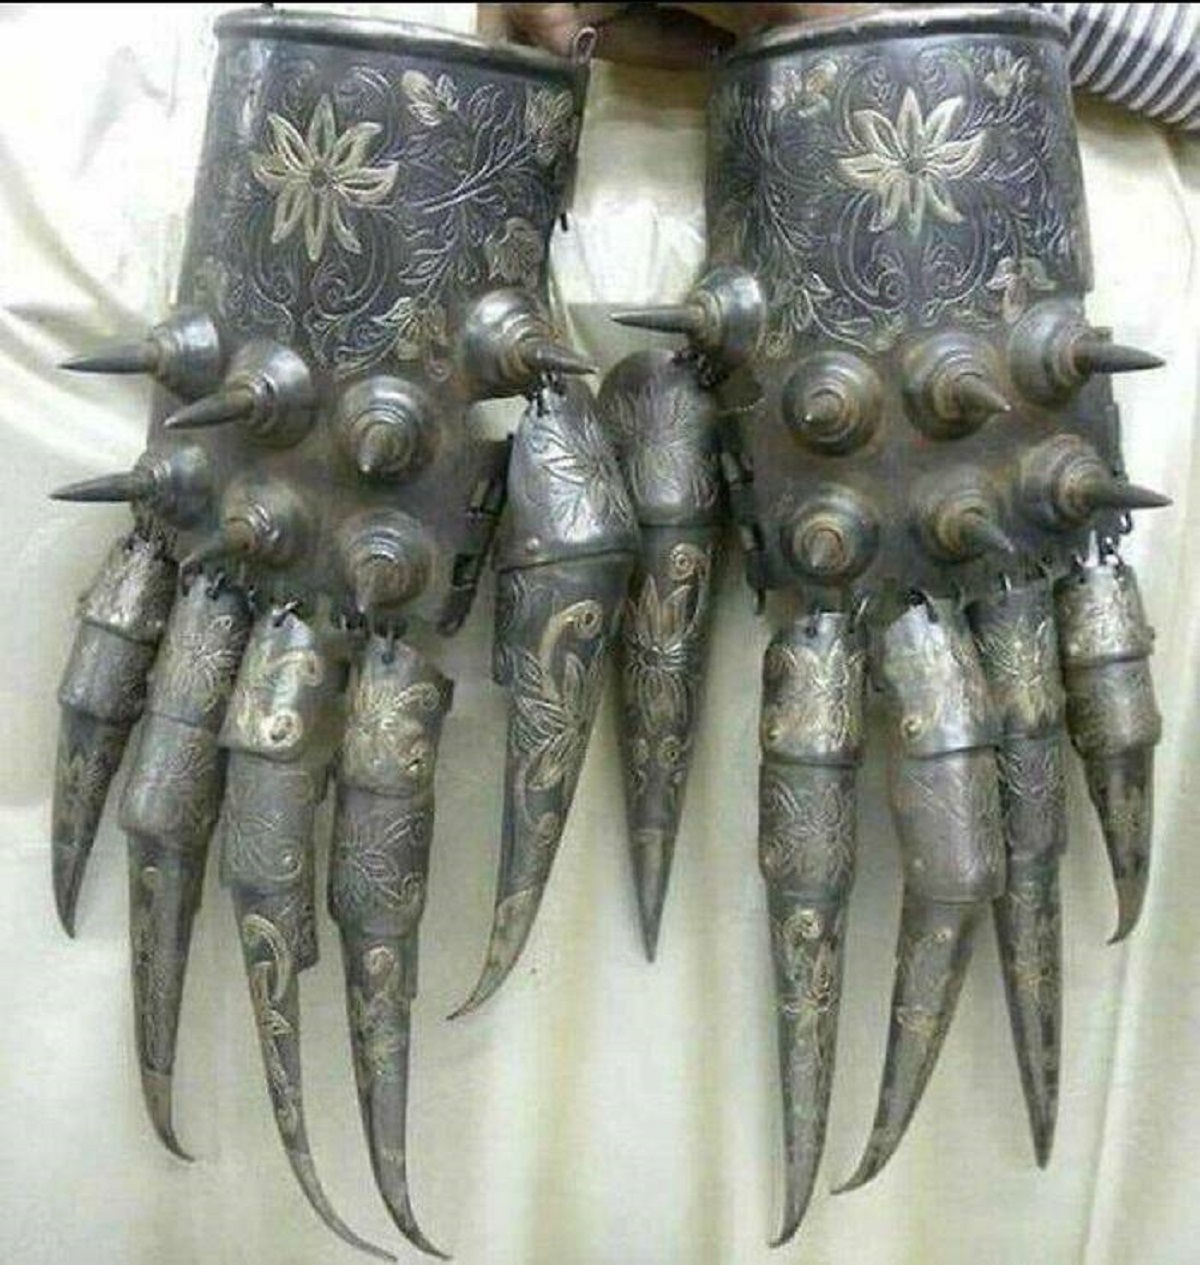 "Bear Paw Armor, Used By Warriors In Islamic, Indian, Persian & Pakistani Civilizations"